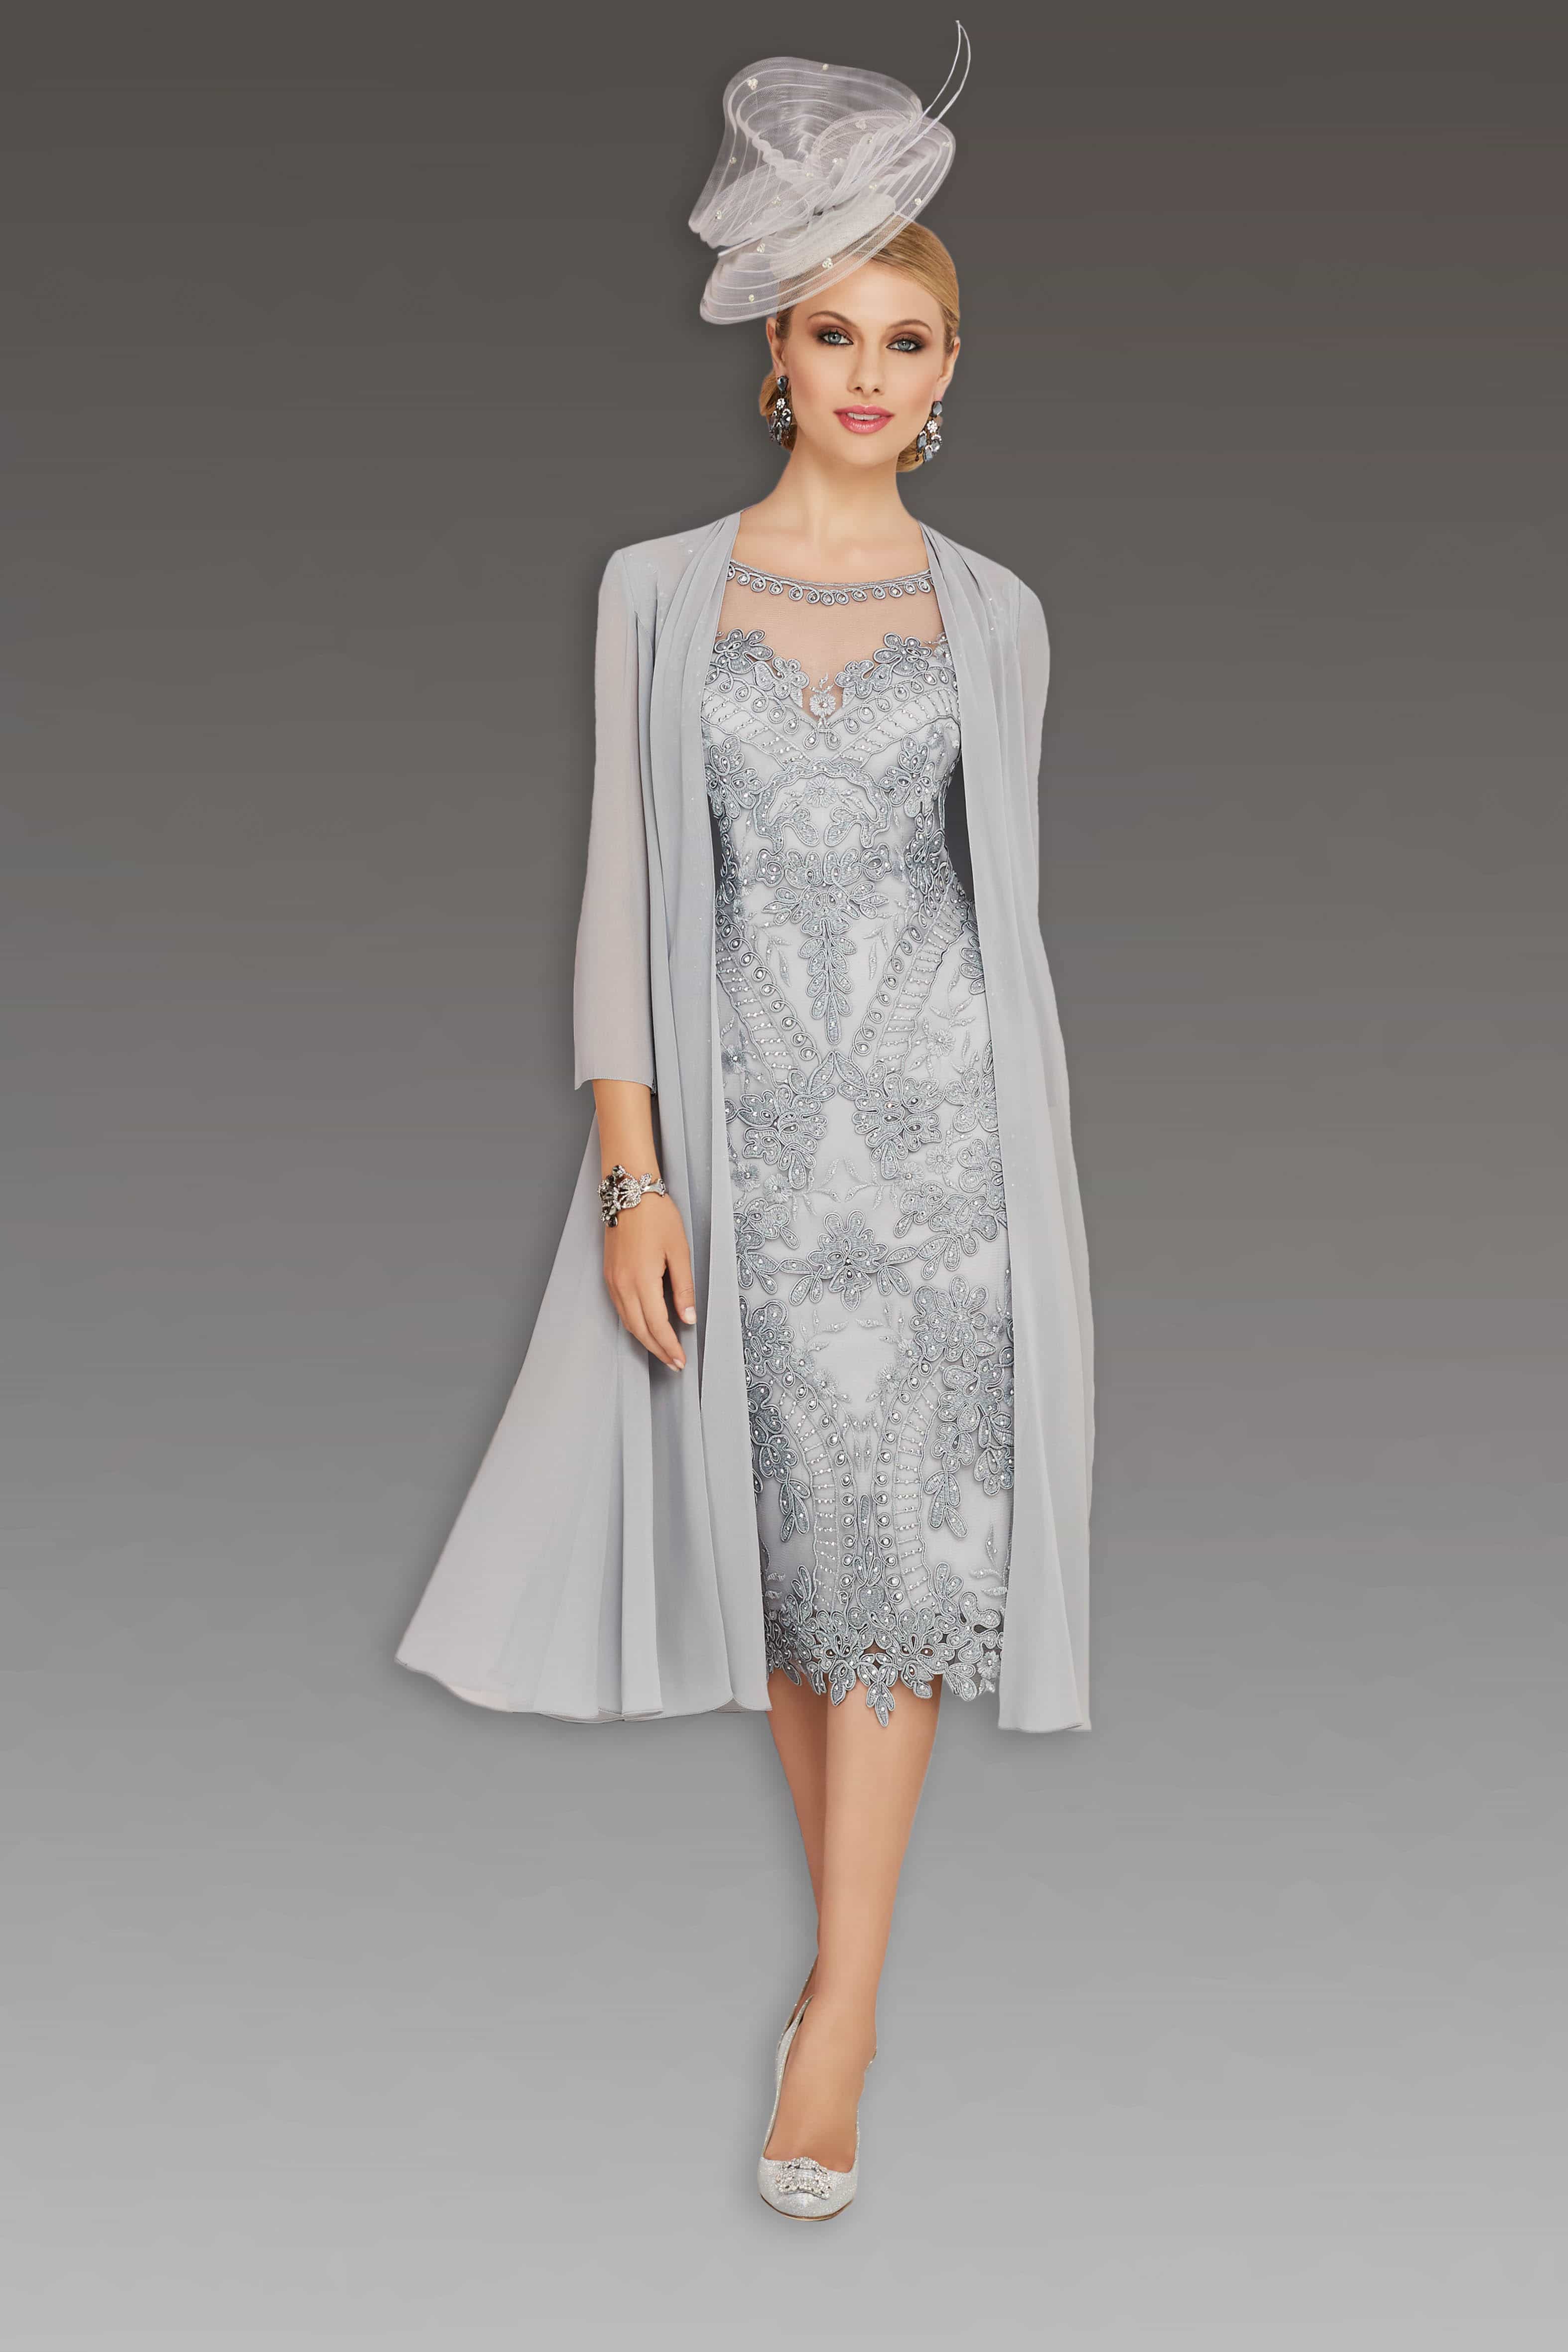 Short lace dress with matching chiffon coat. 008667 - Catherines of Partick